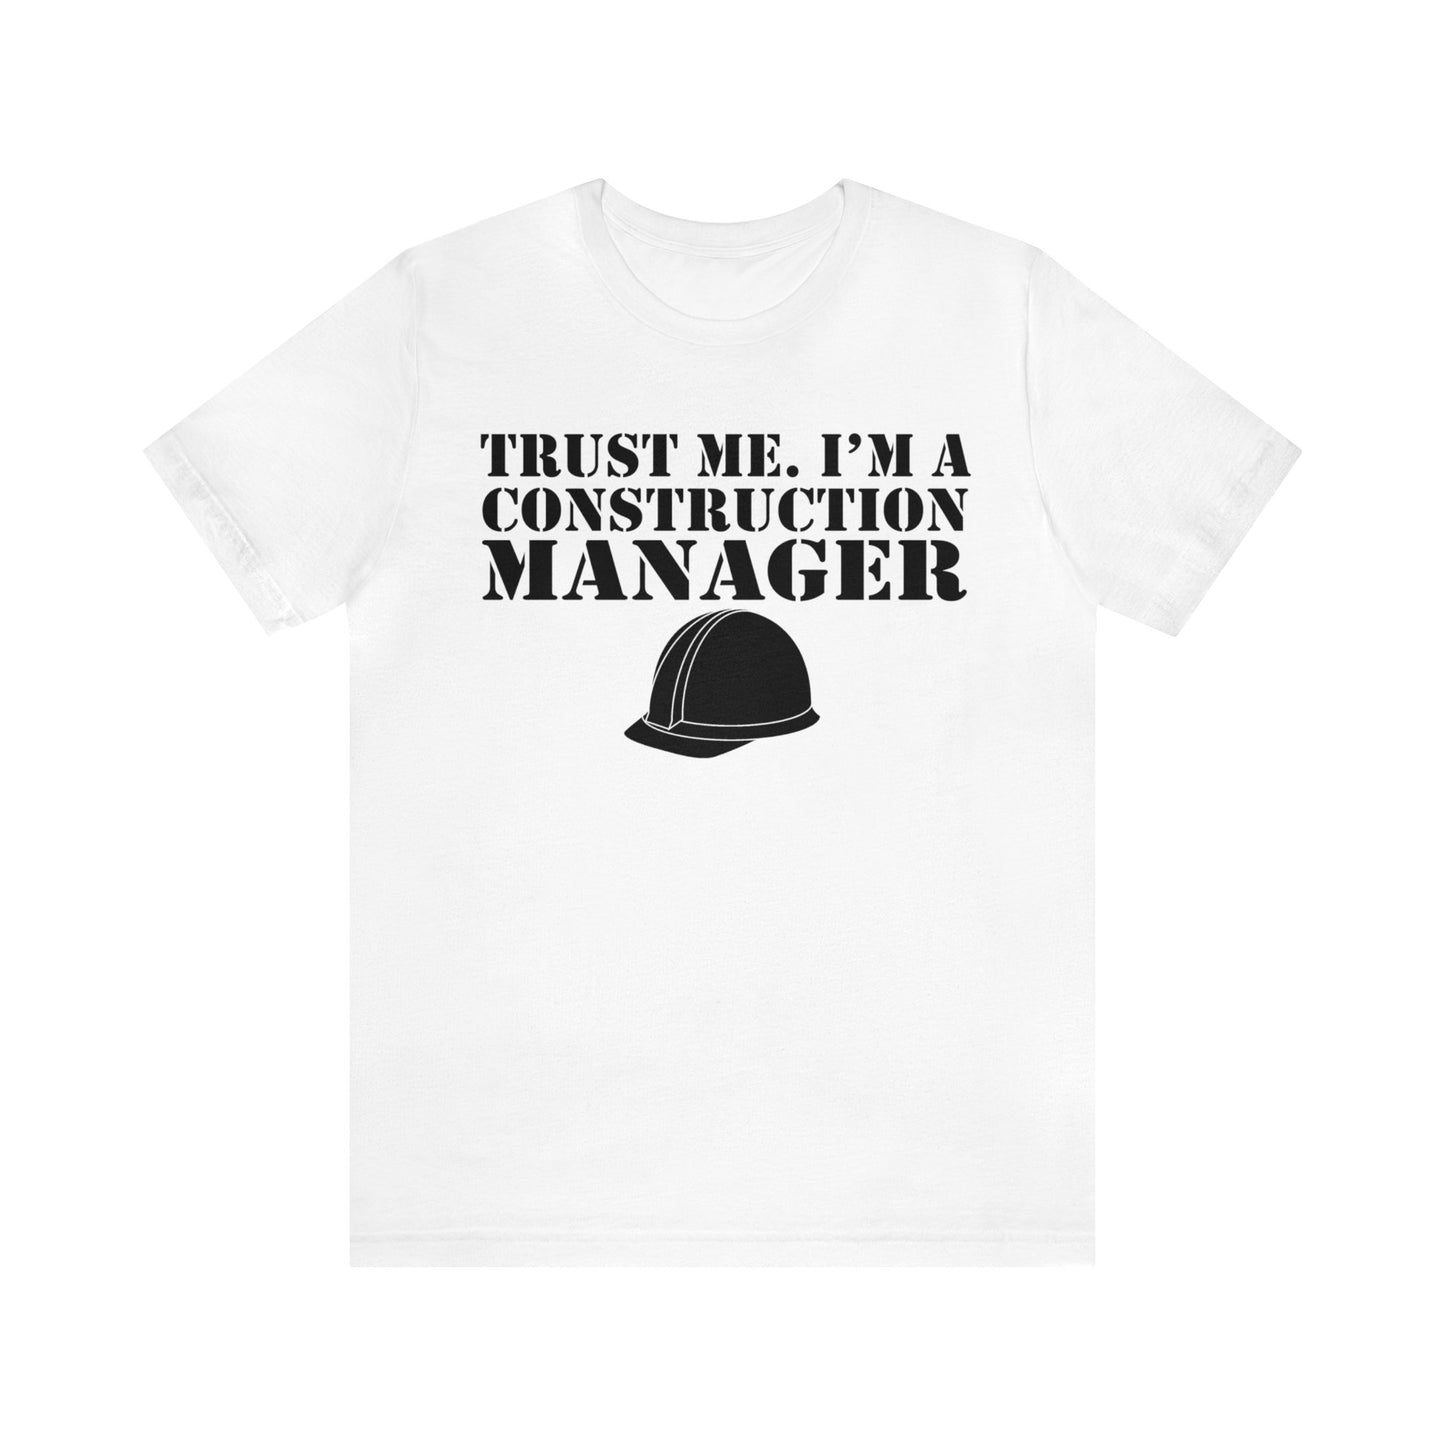 Trust Me I'm a Construction Manager Tee – Perfect Gift for Building Pros